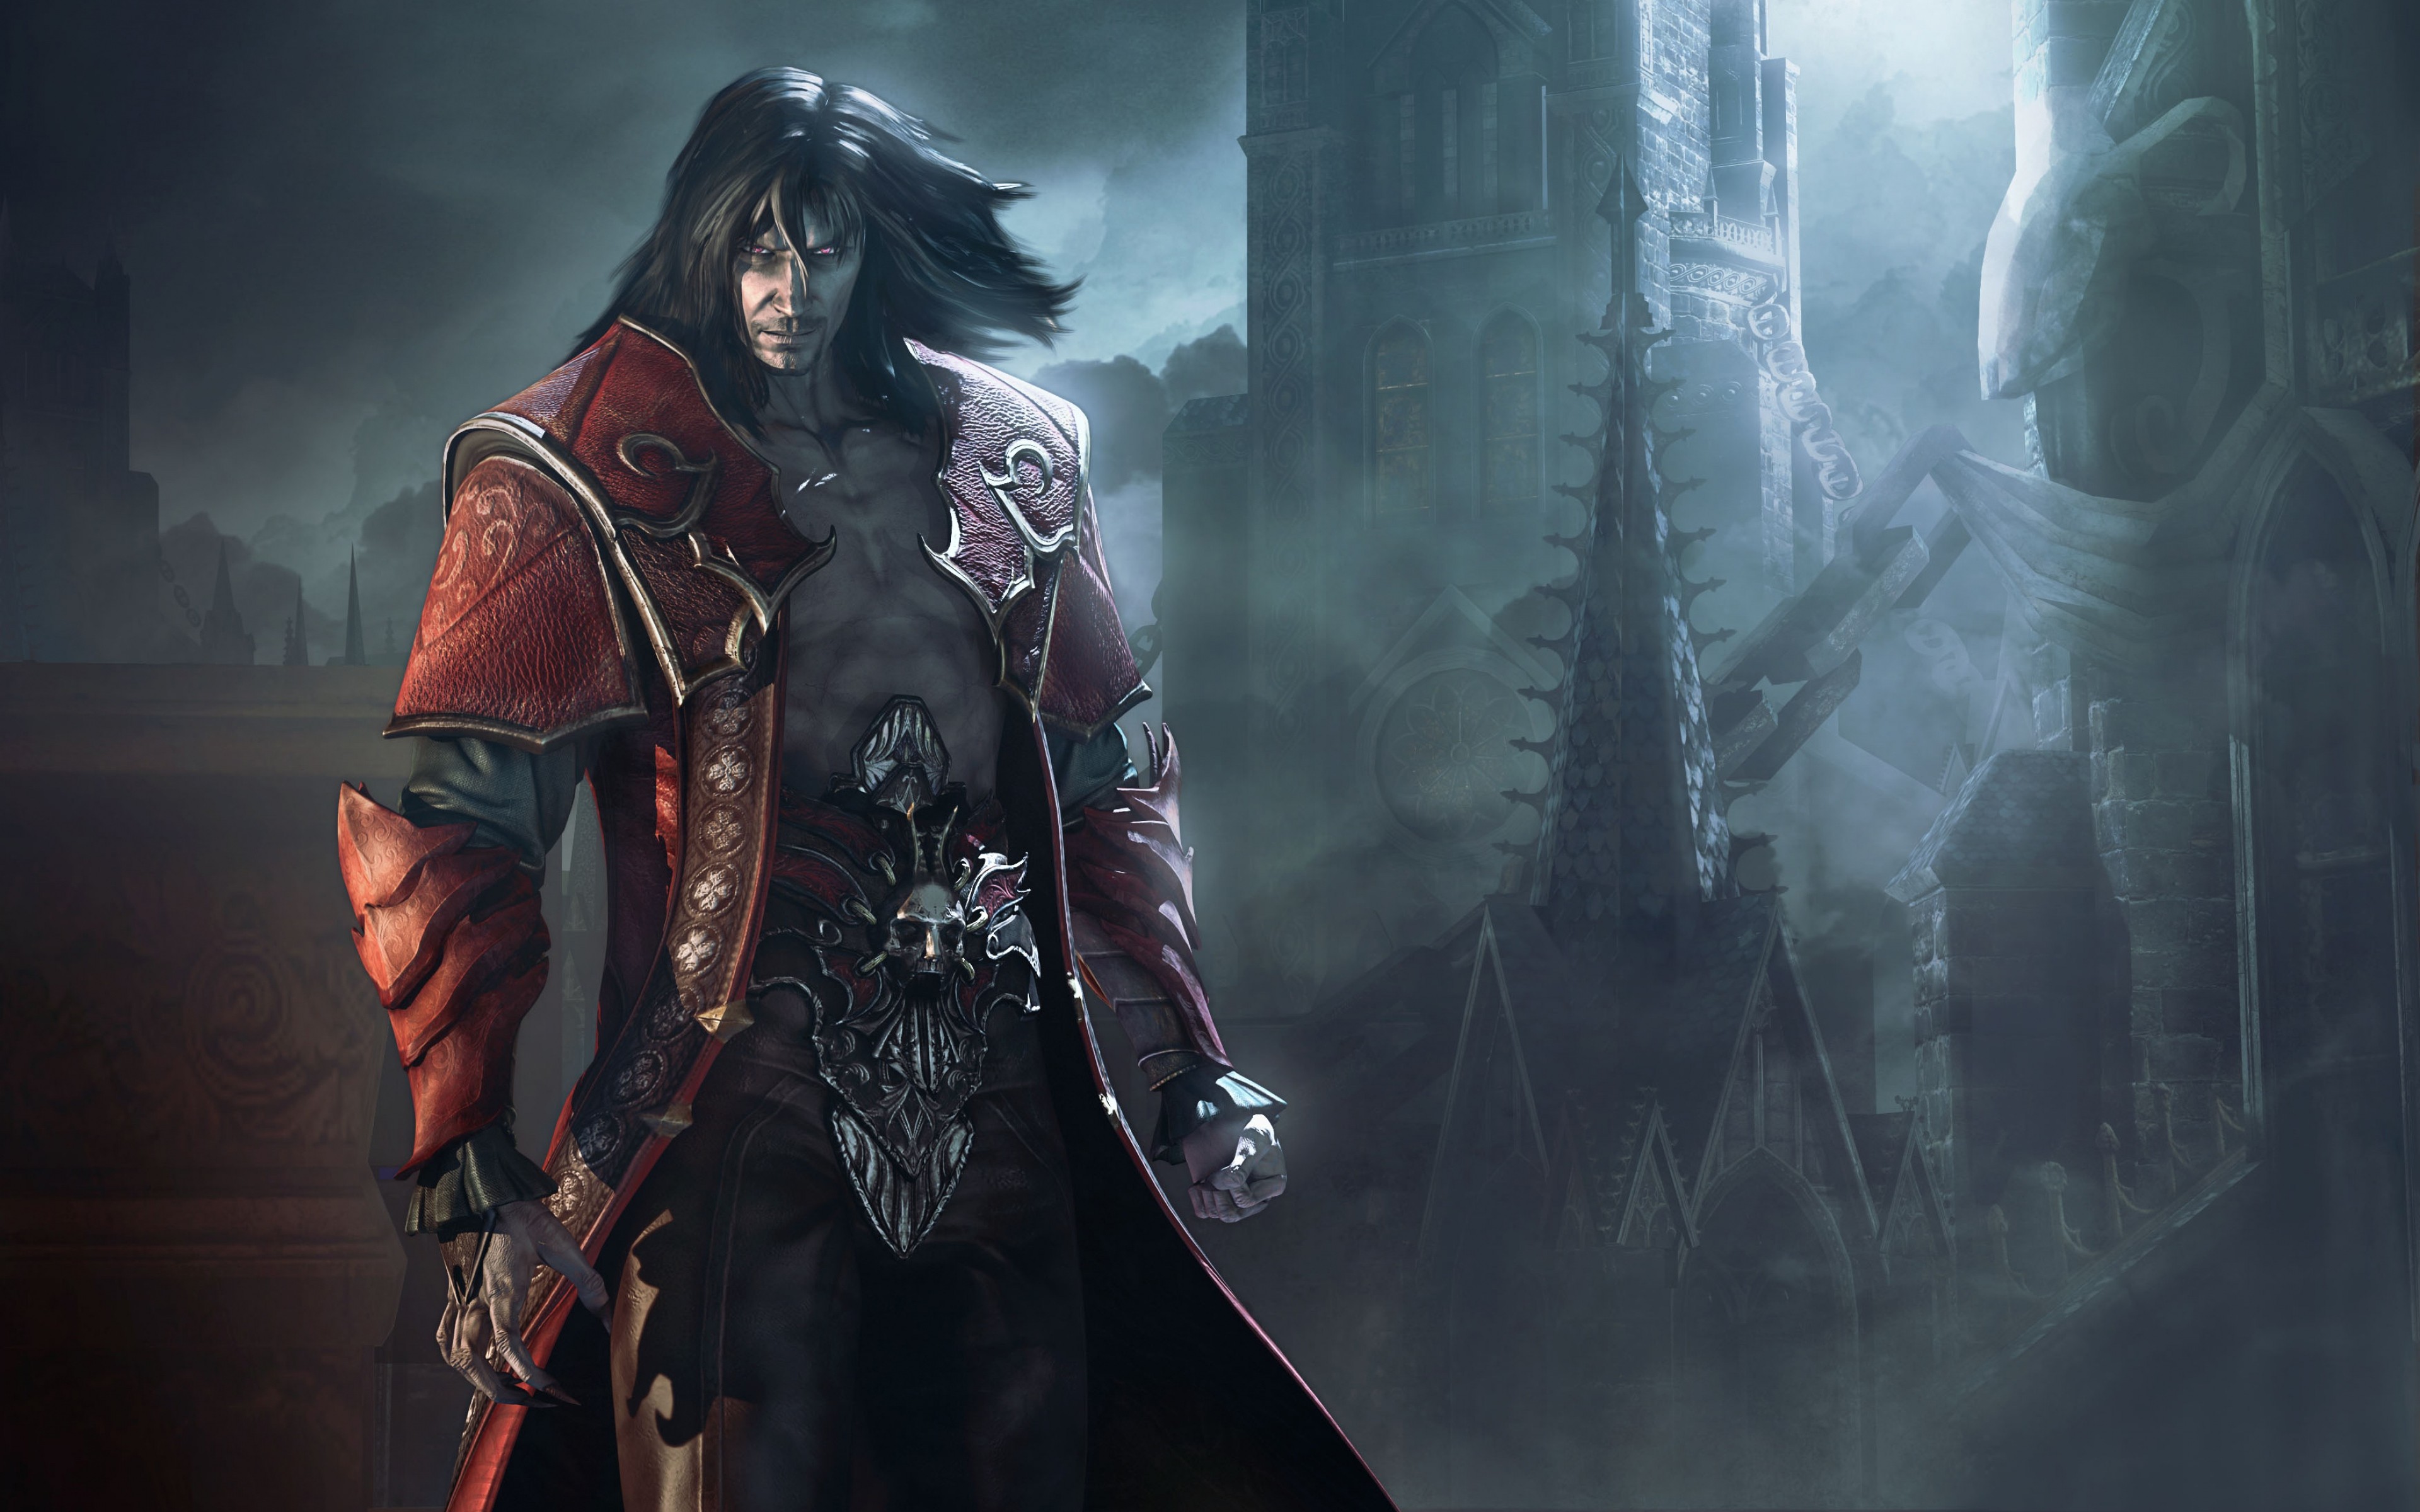 video game characters, Video games, Castlevania, Castlevania: Lords of Shadow, Castlevania: Lords of Shadow 2 Wallpaper